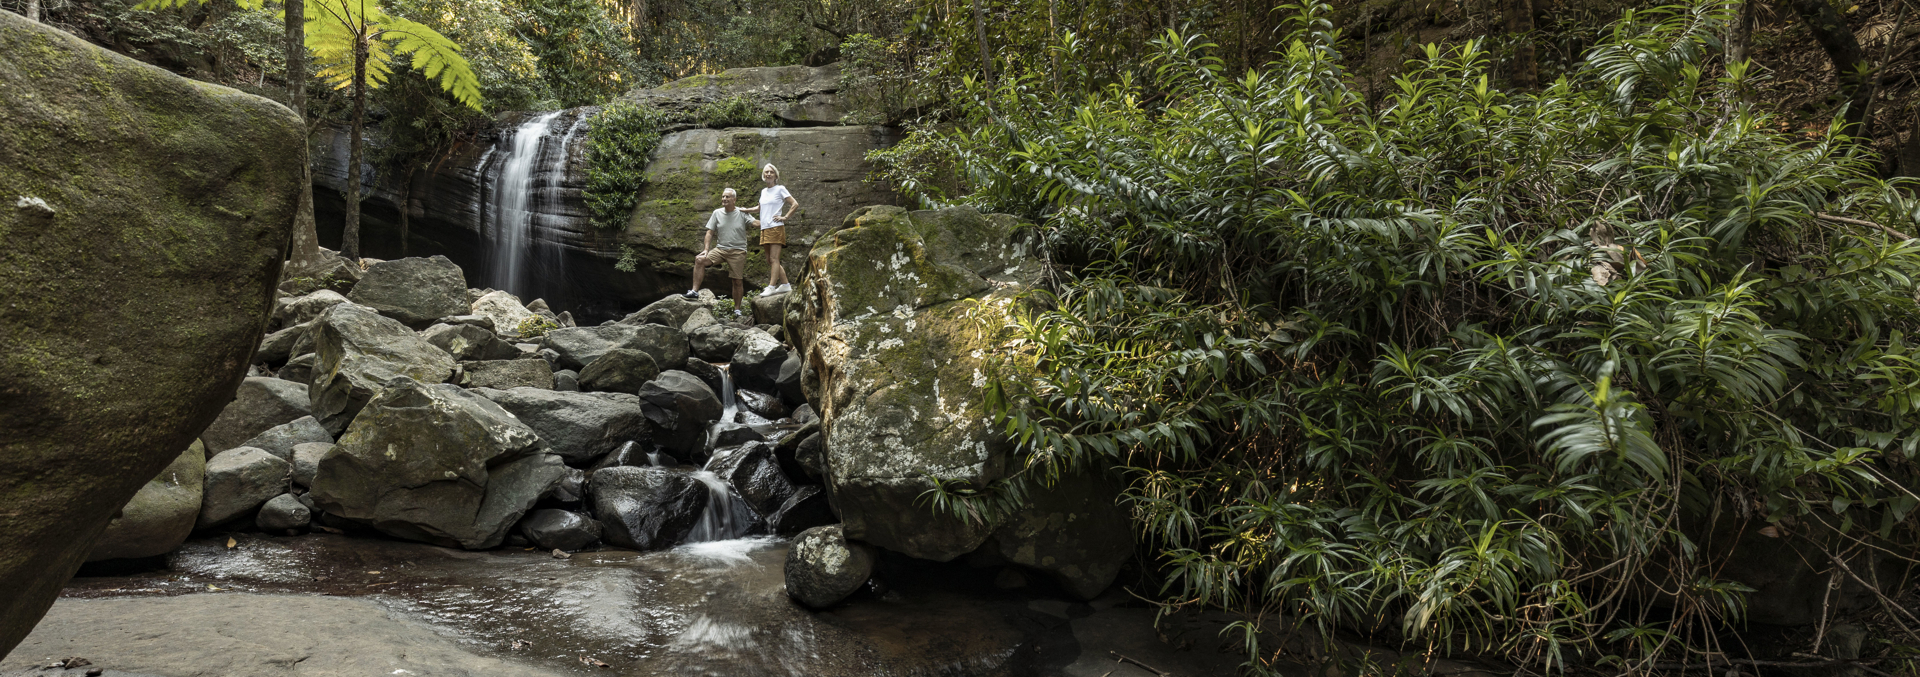 A man and woman relax a top a rocky area in front of a waterfall surrounded by a tropical rainforest.